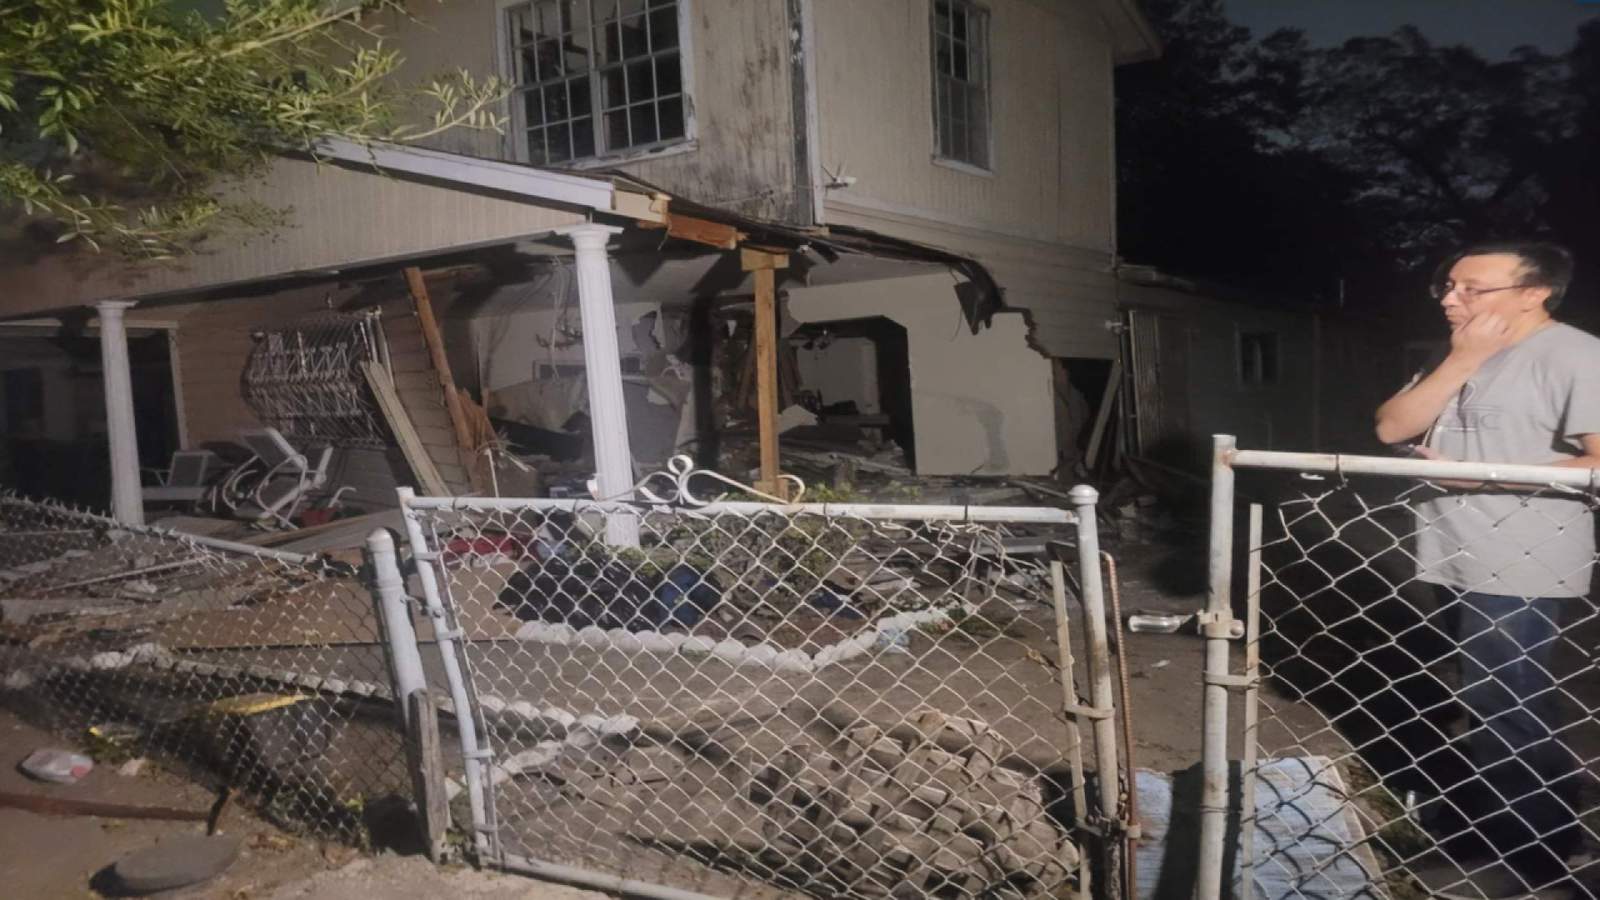 SUV hitting West Side home ‘sounded like an explosion,’ man says